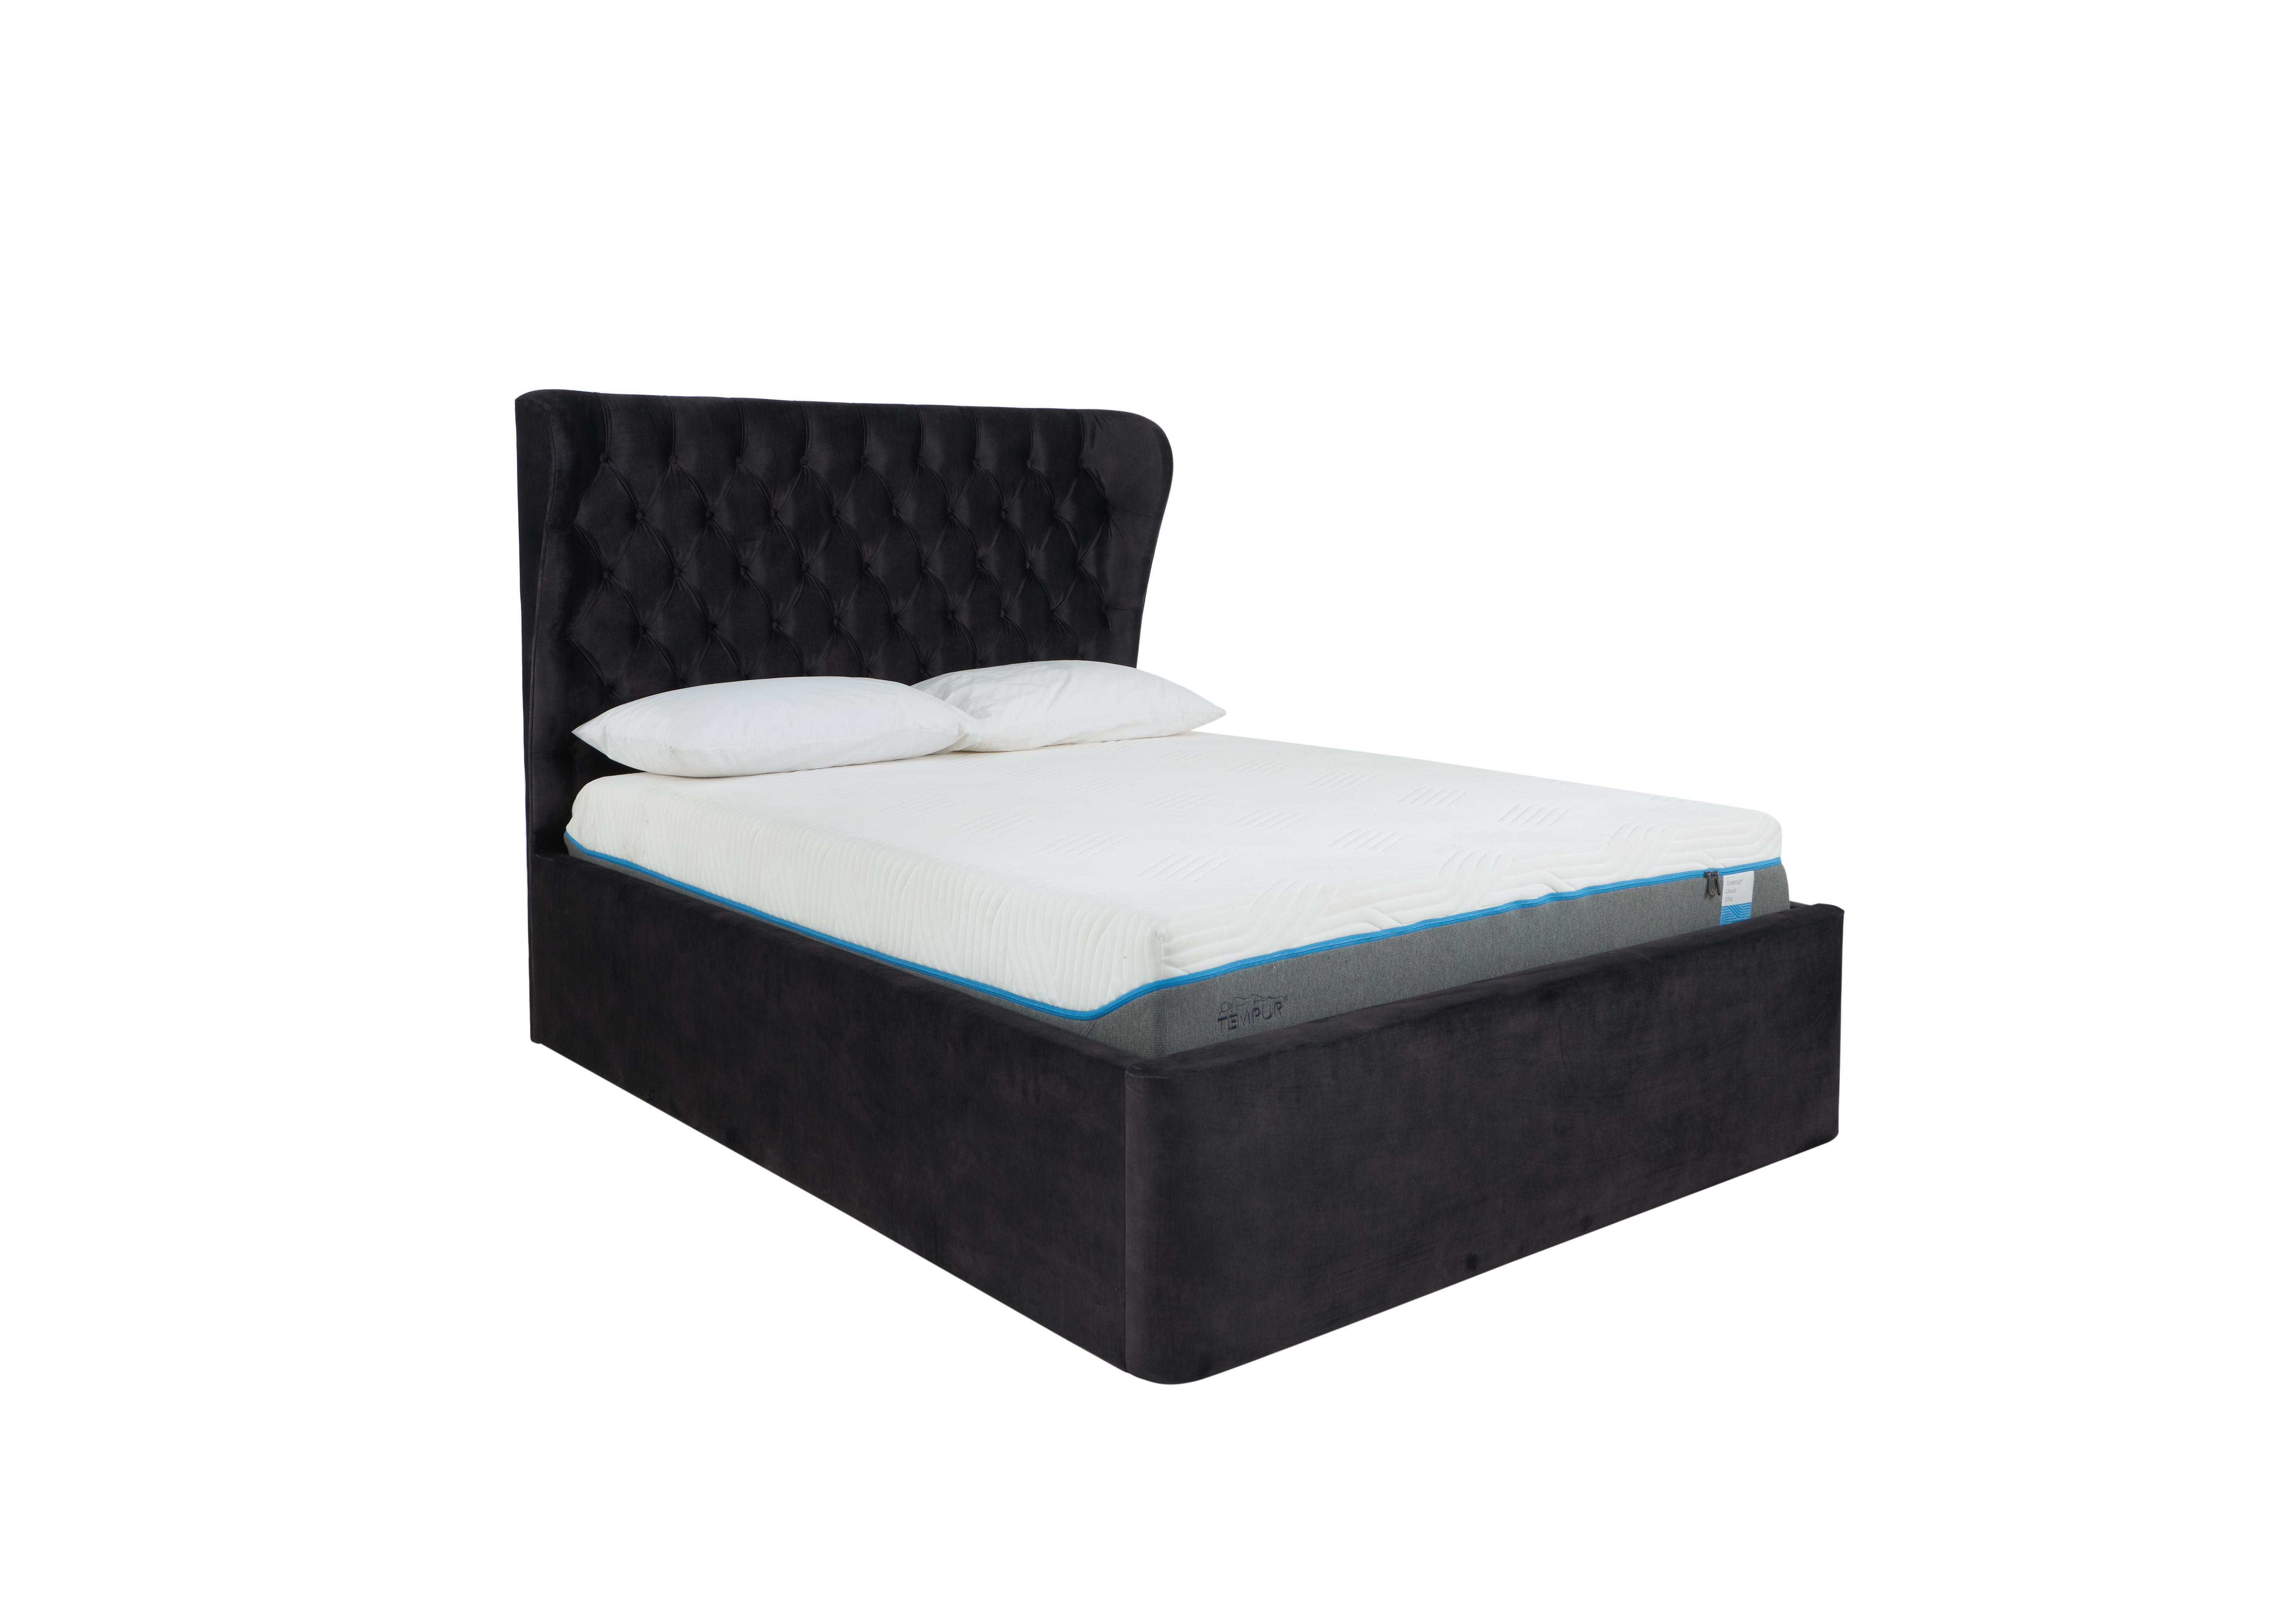 Kendall Ottoman Bed Frame in Savannah Coal on Furniture Village